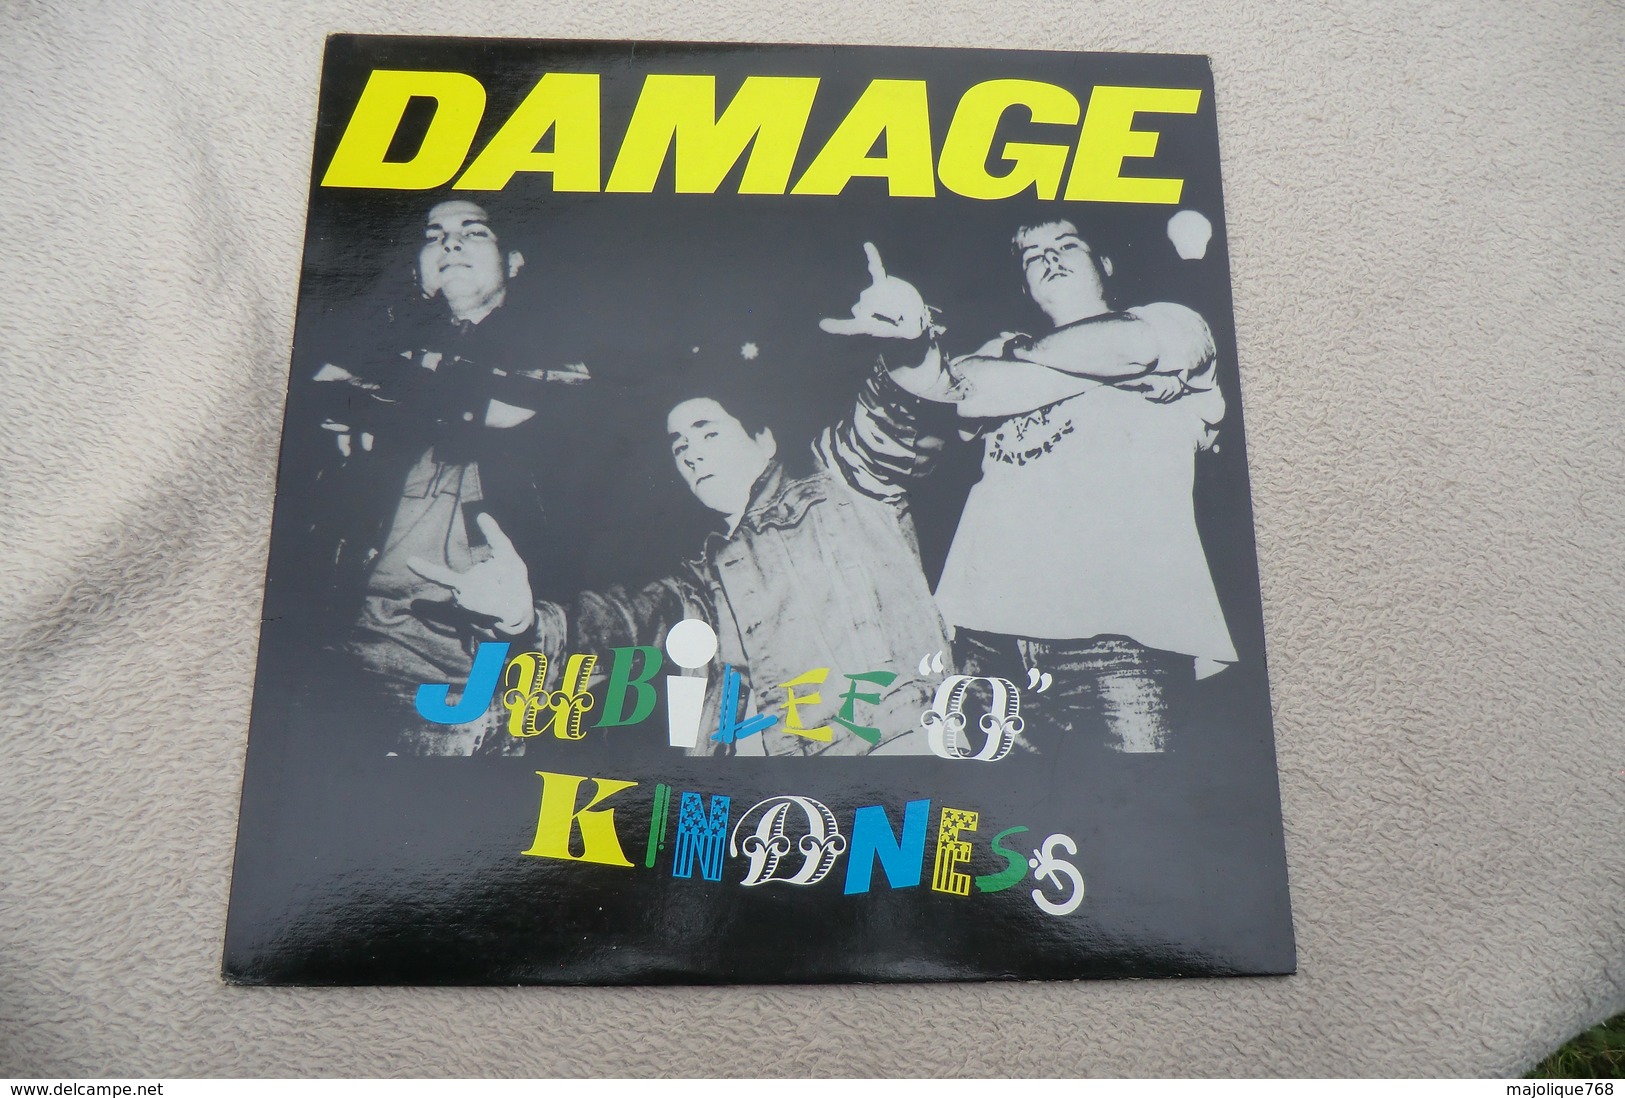 Damage - Jubilee "o" Kindness - Space Fish Records WRA1.583 - 1987 - - Punk